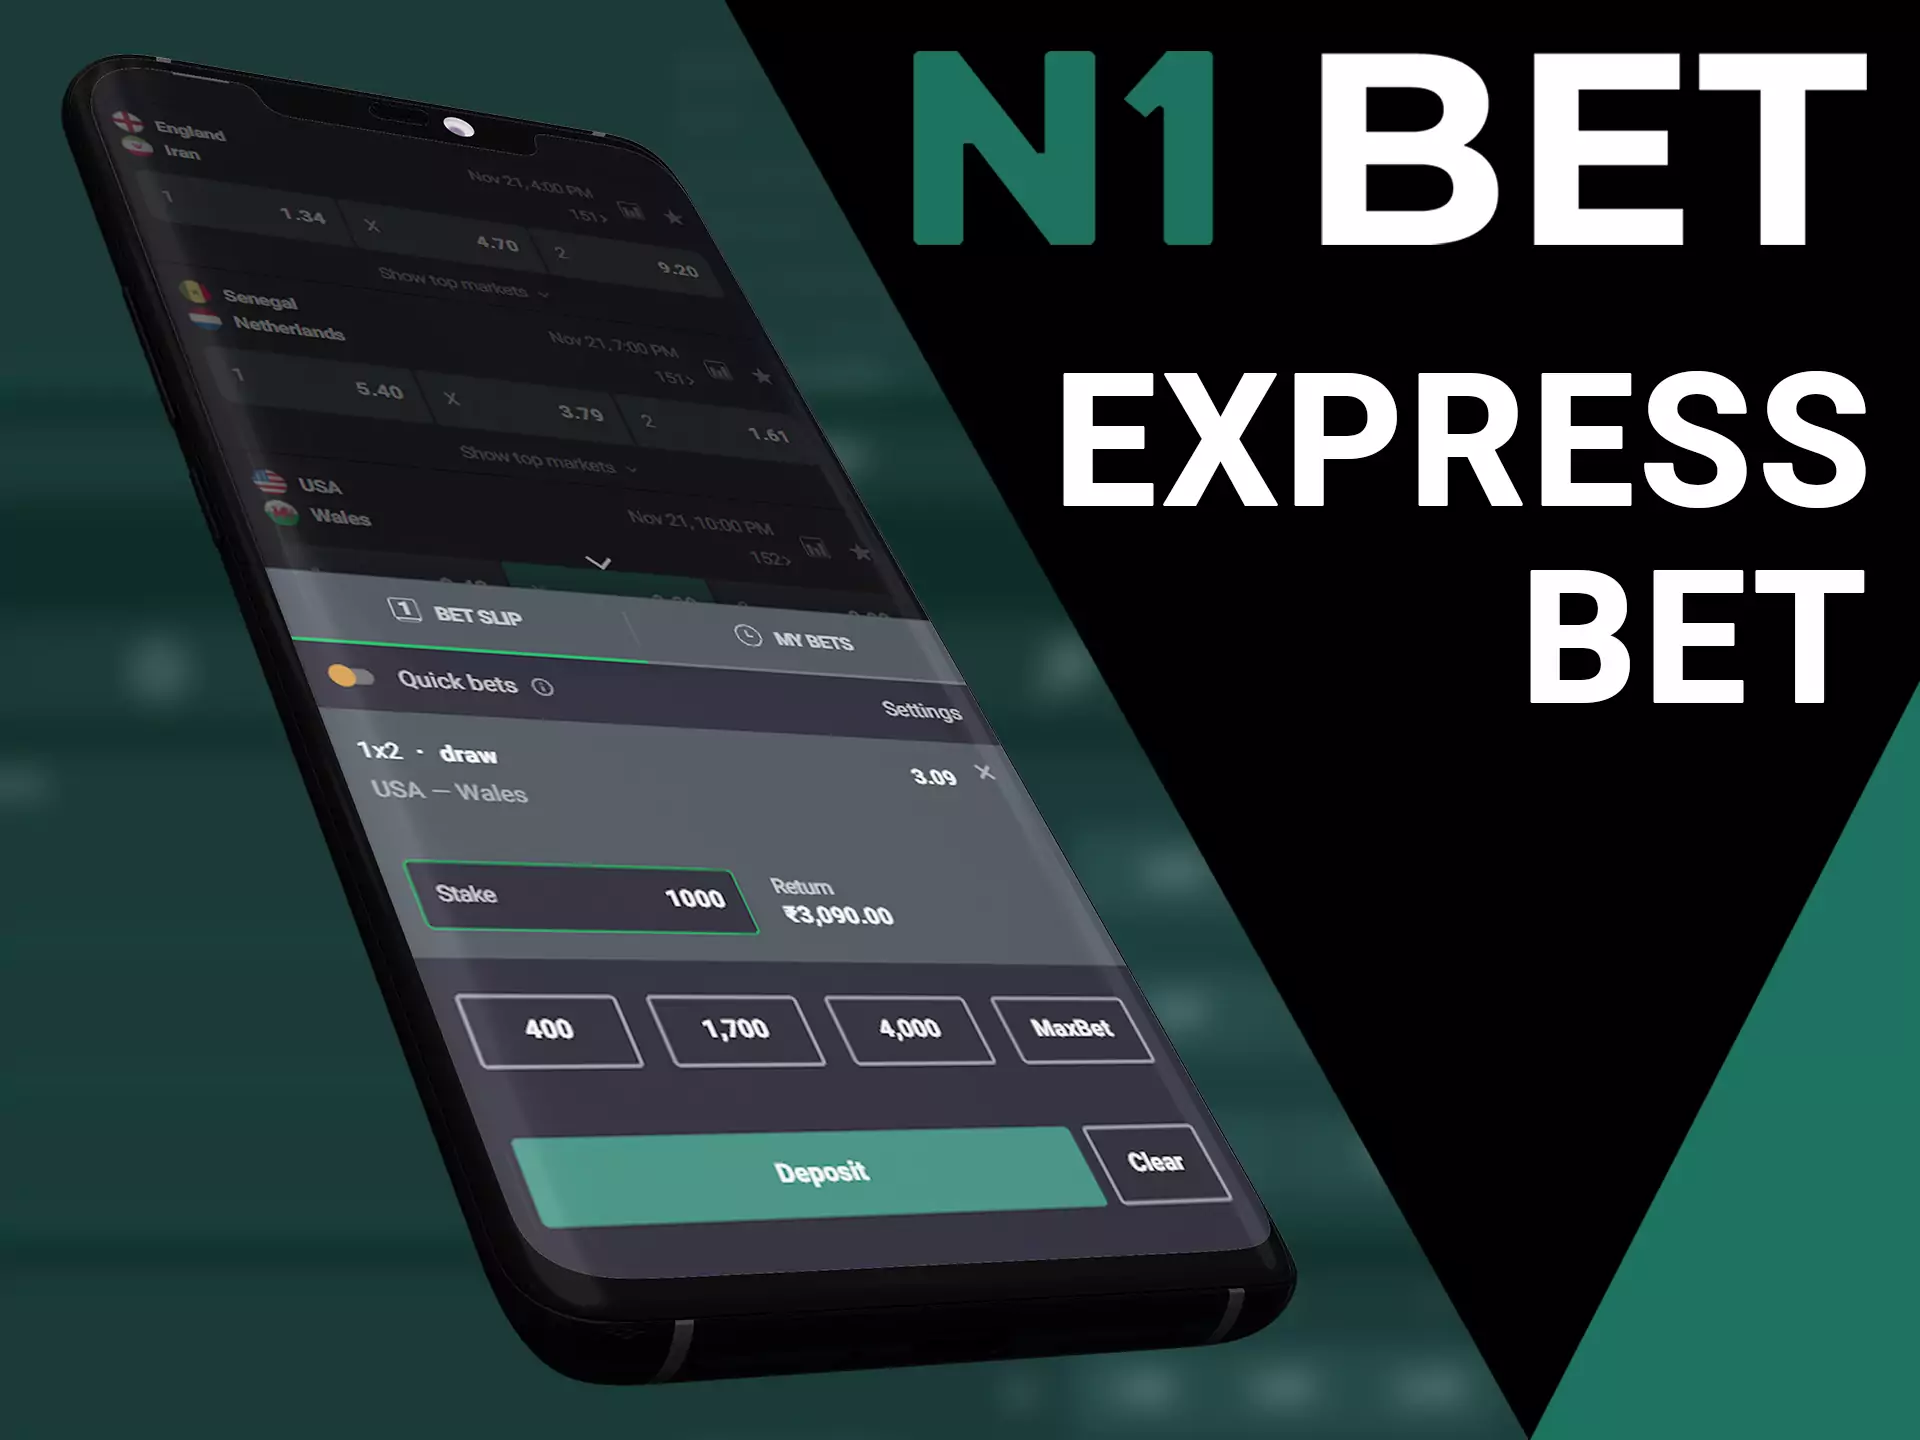 Make quick bets in N1Bet app.